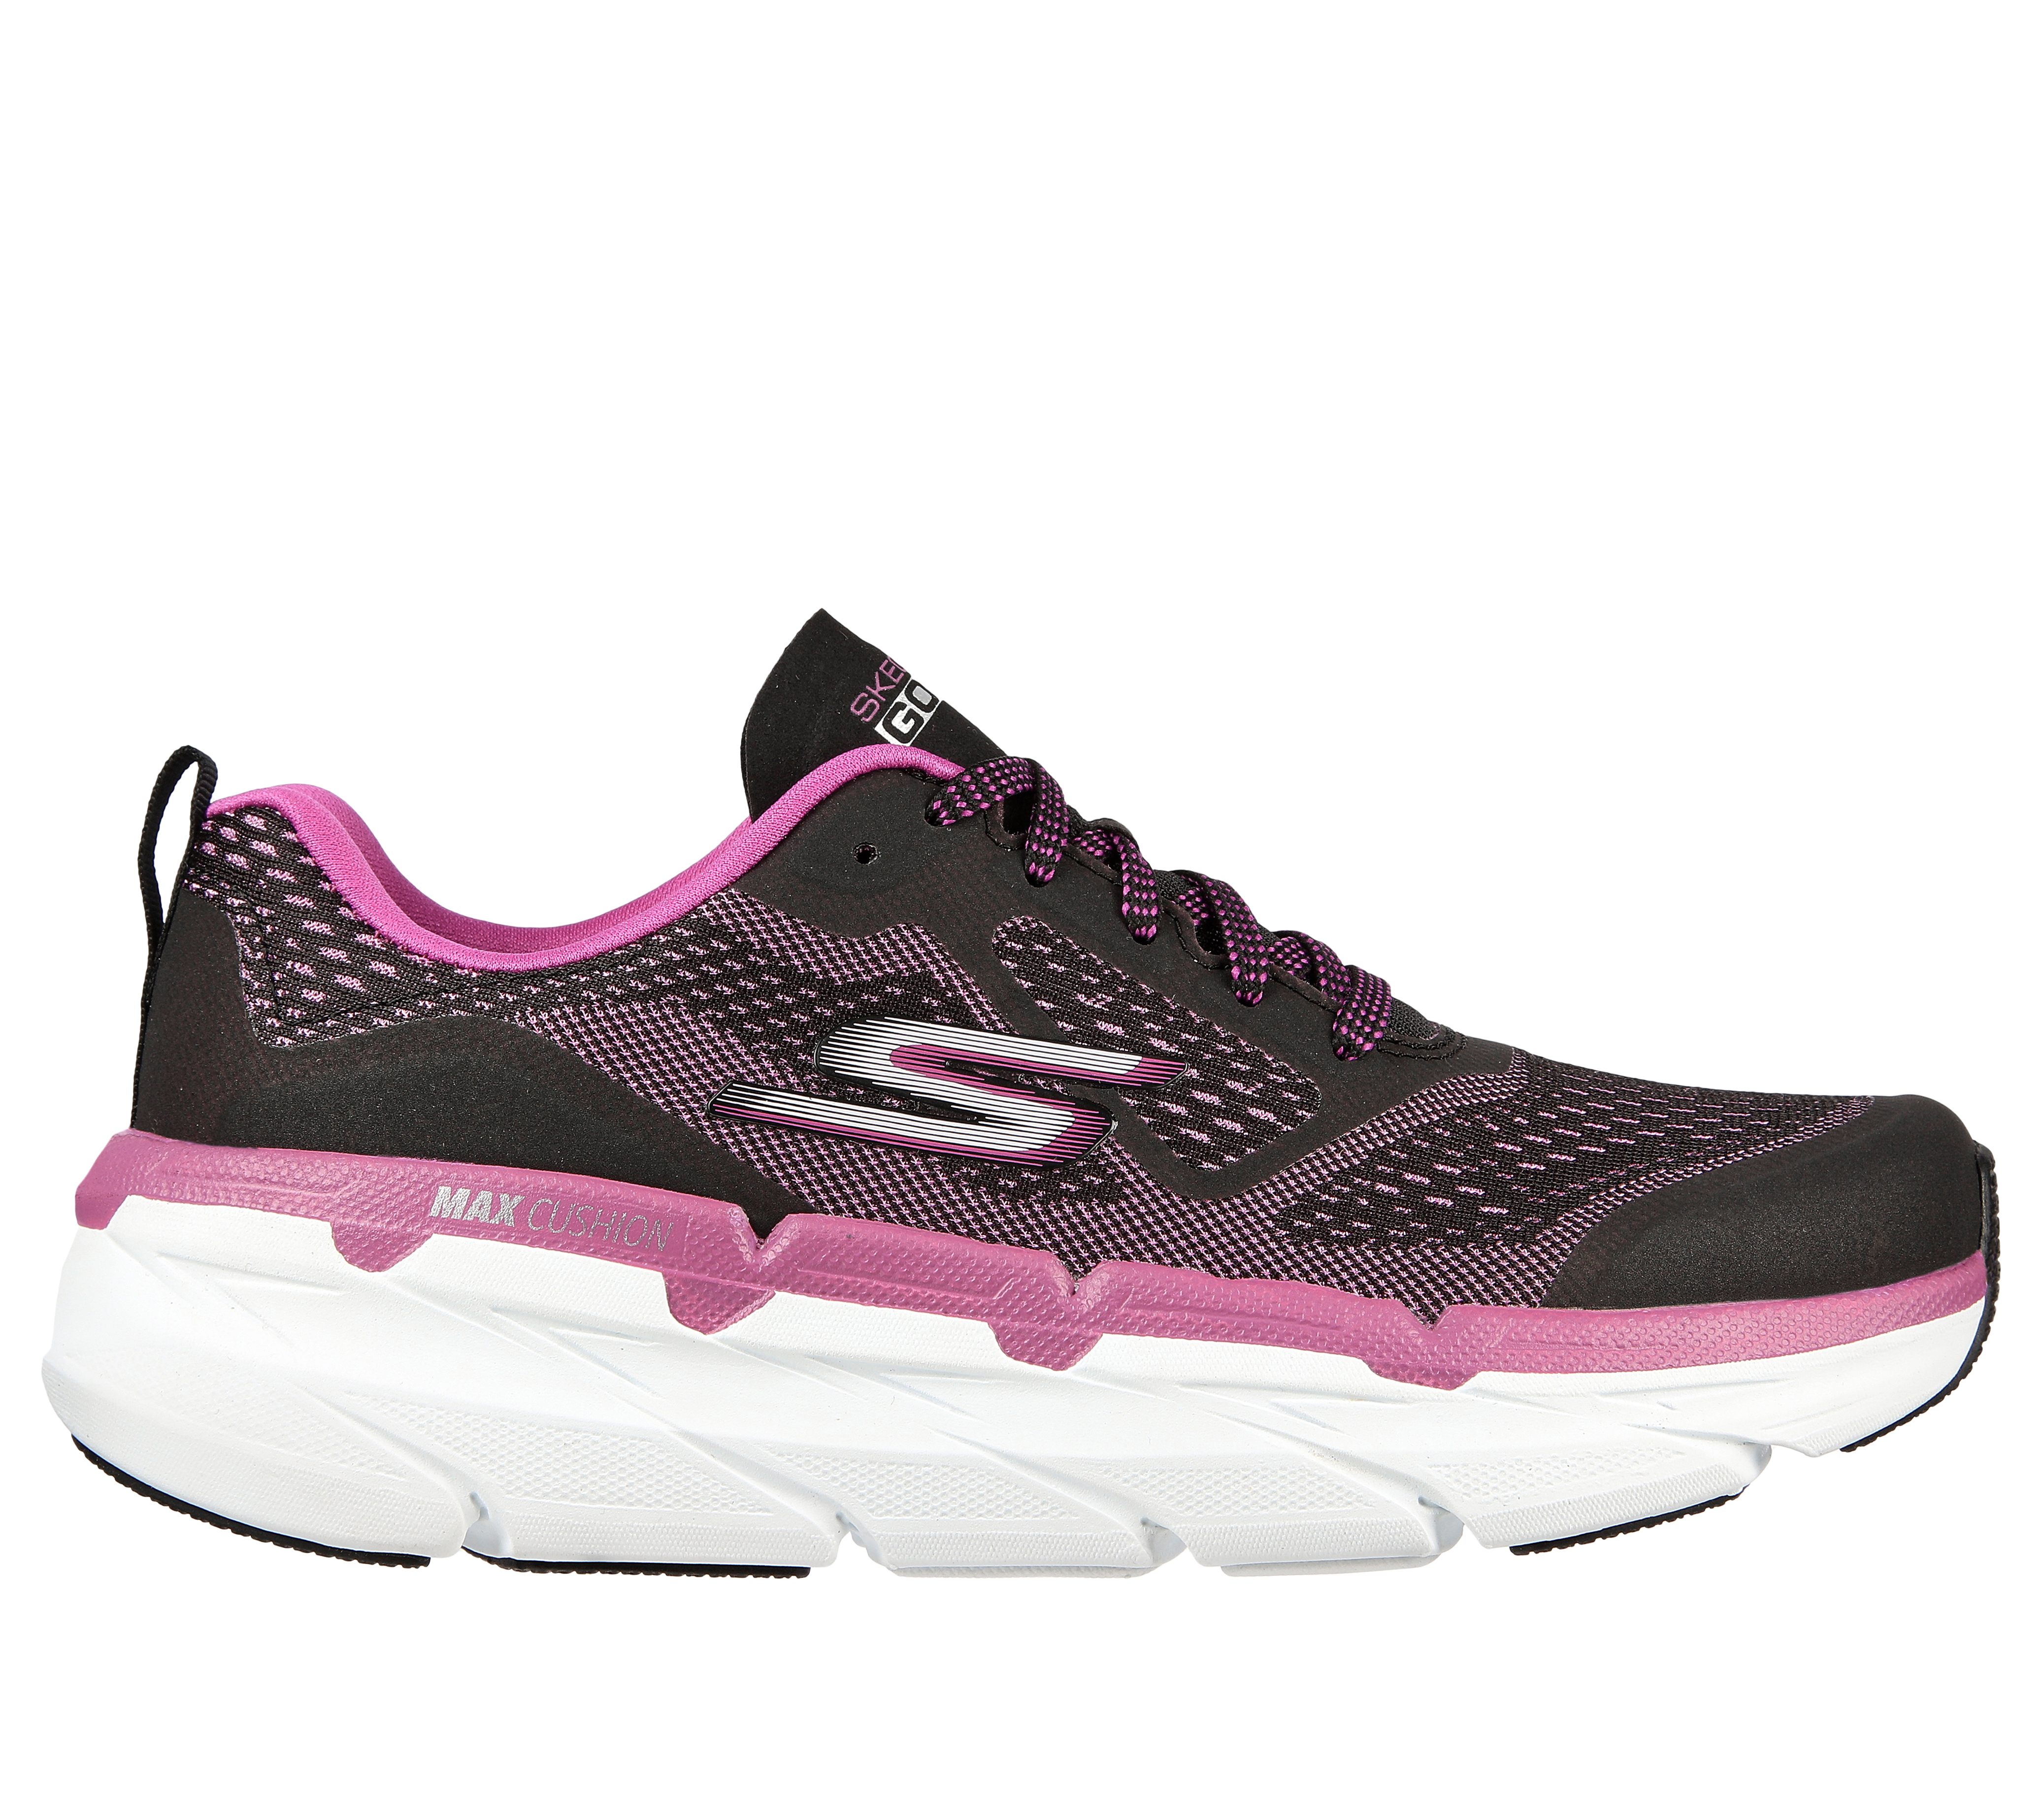 skechers offers today